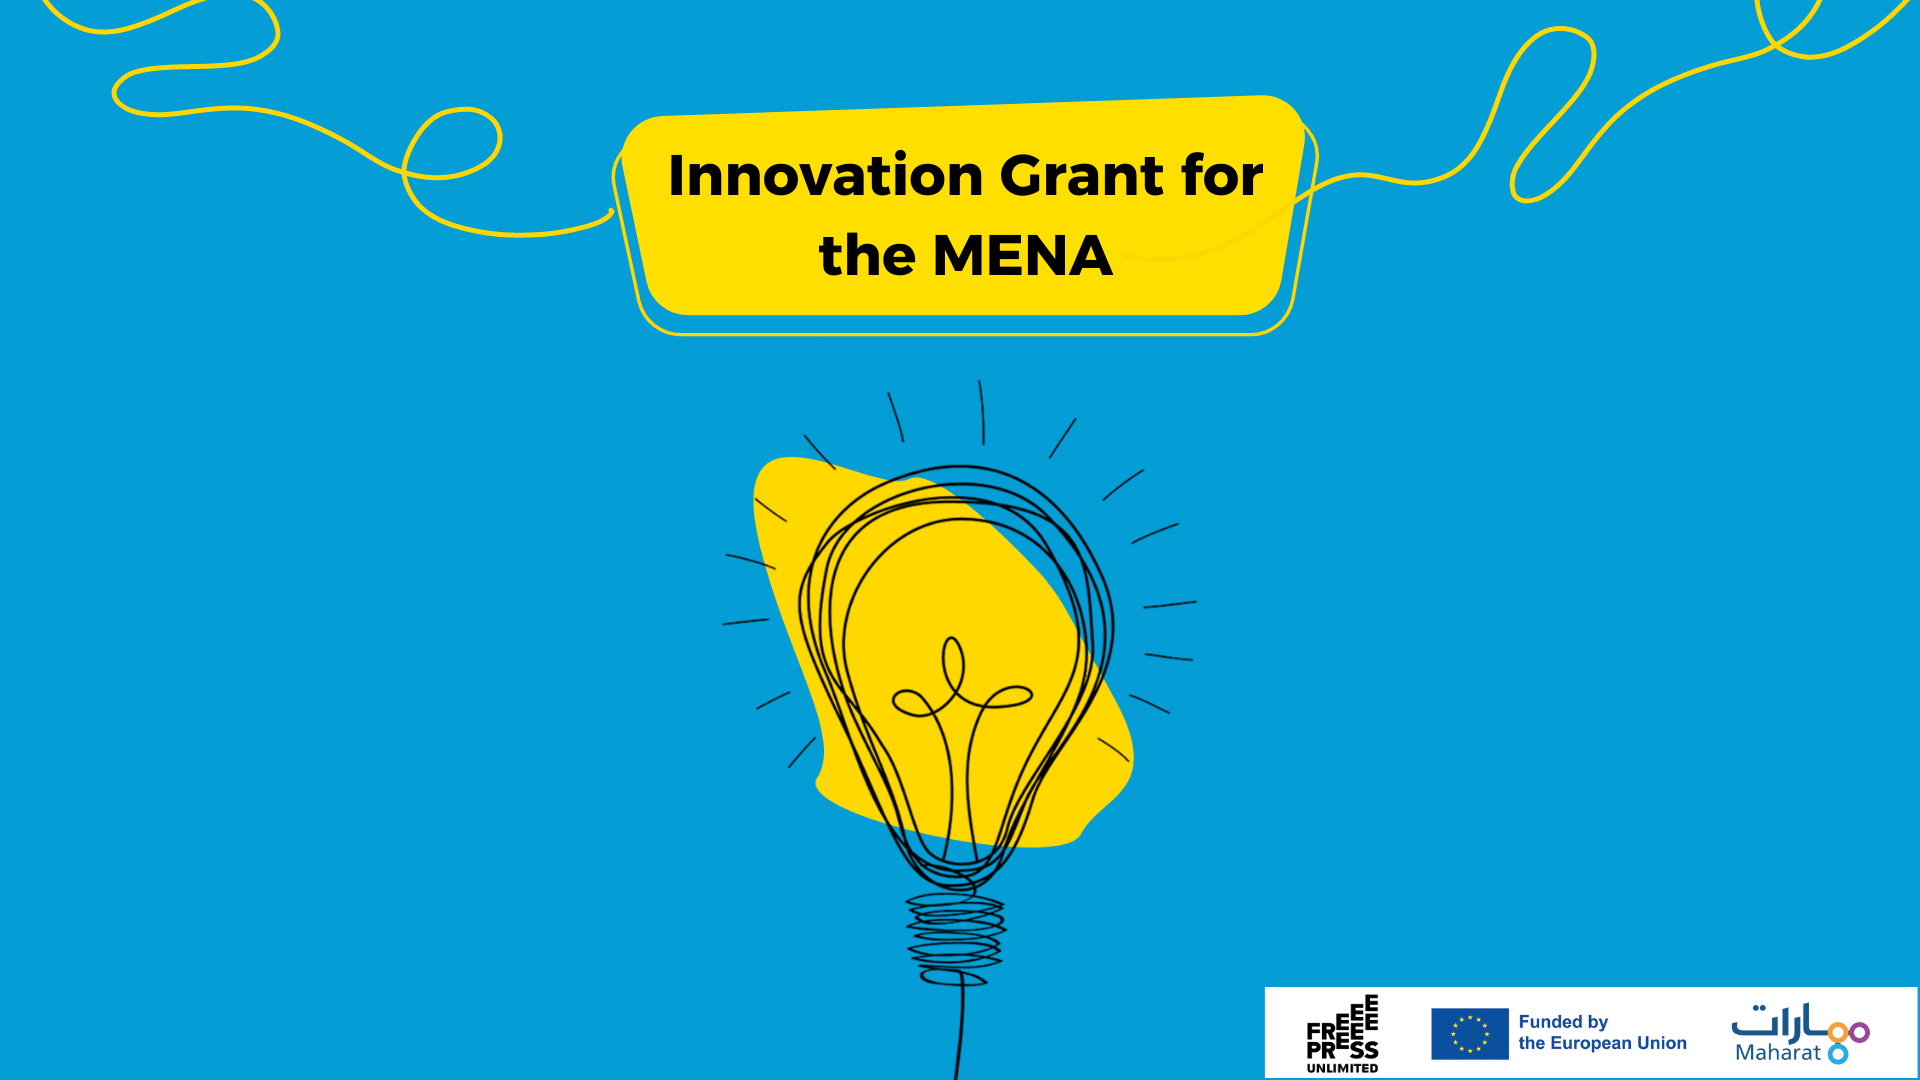 An Innovation Grant For The MENA